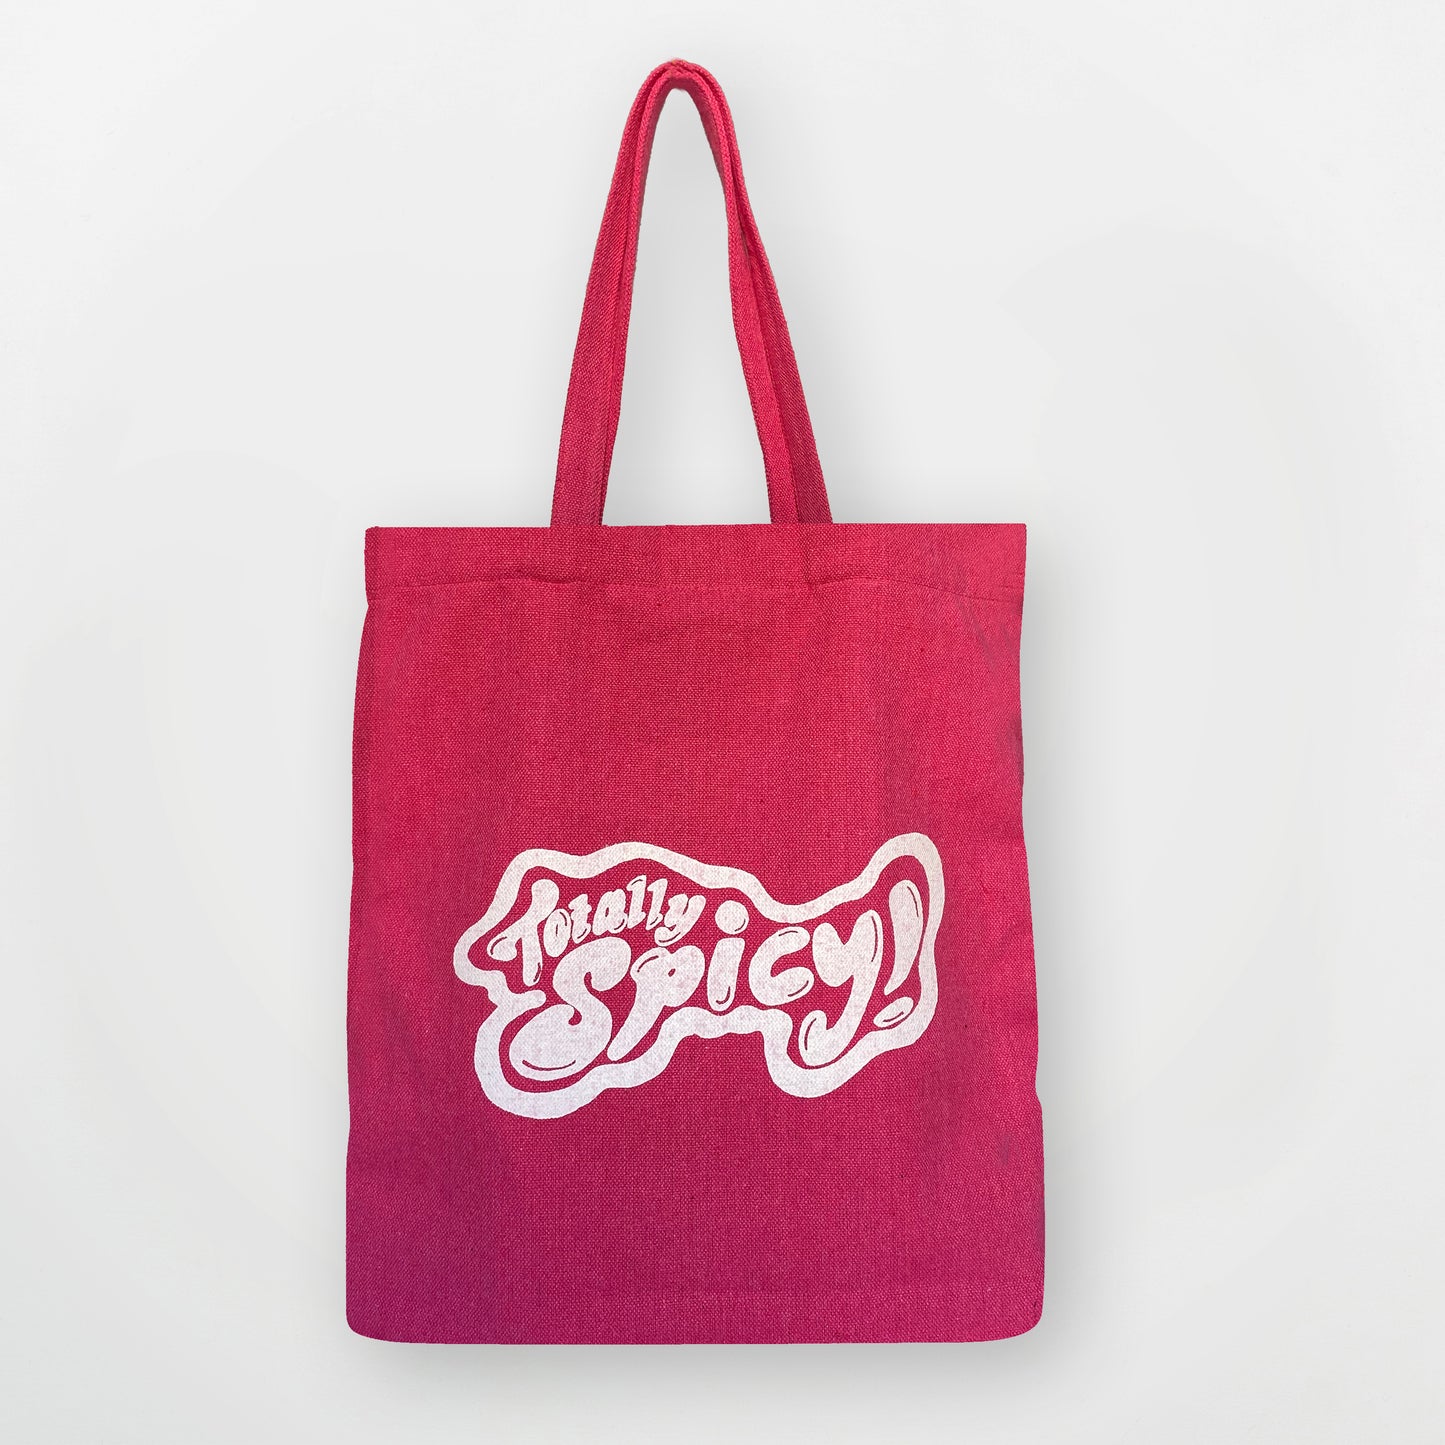 Totally spicy Tote Bag